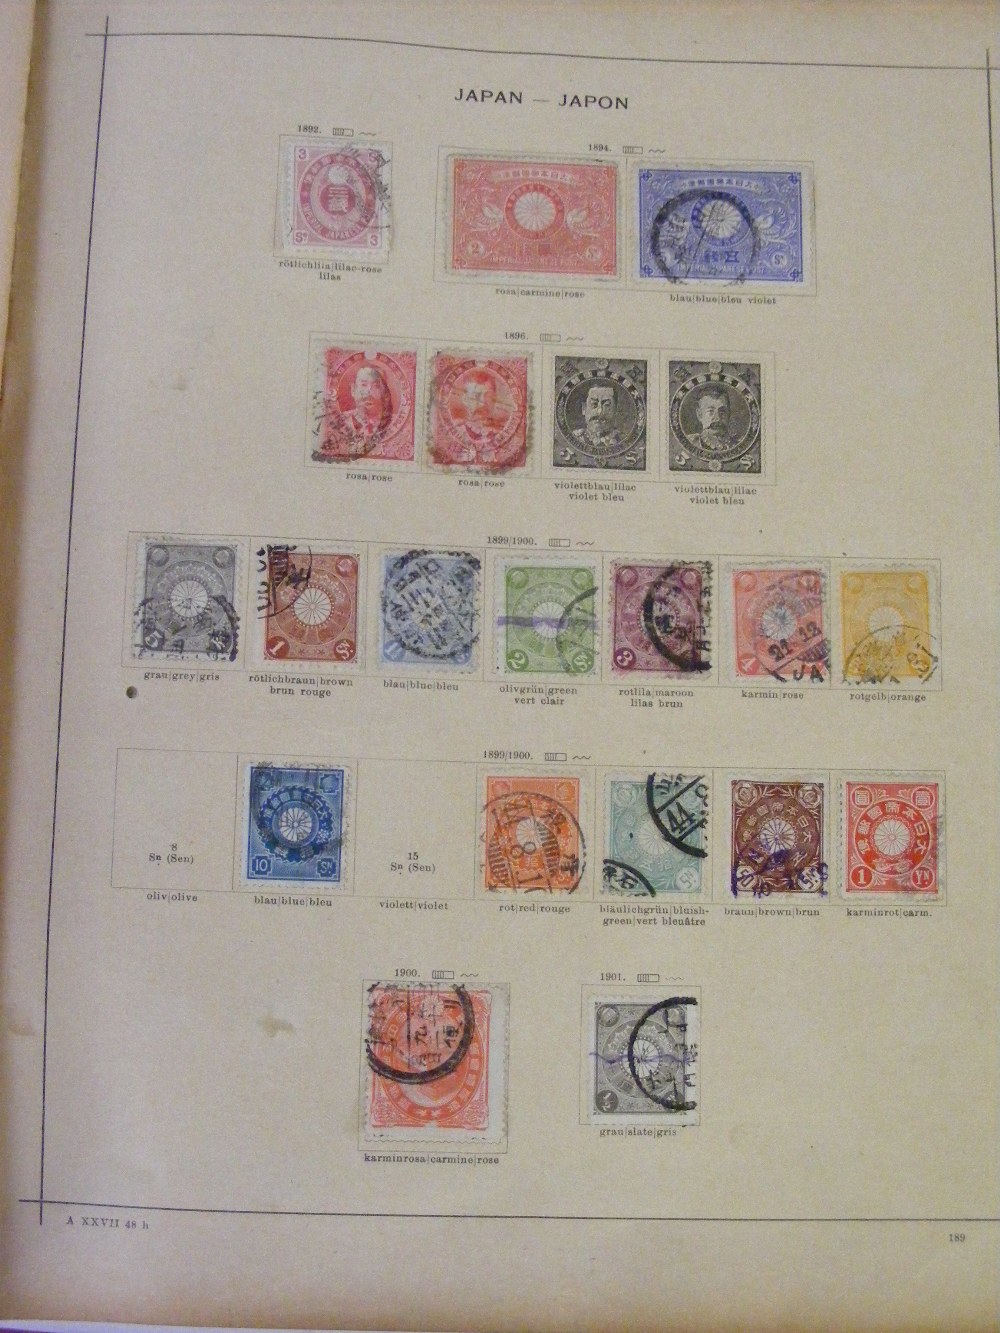 An early 20th Century postage stamp album of stamps from around the world, with some stamps